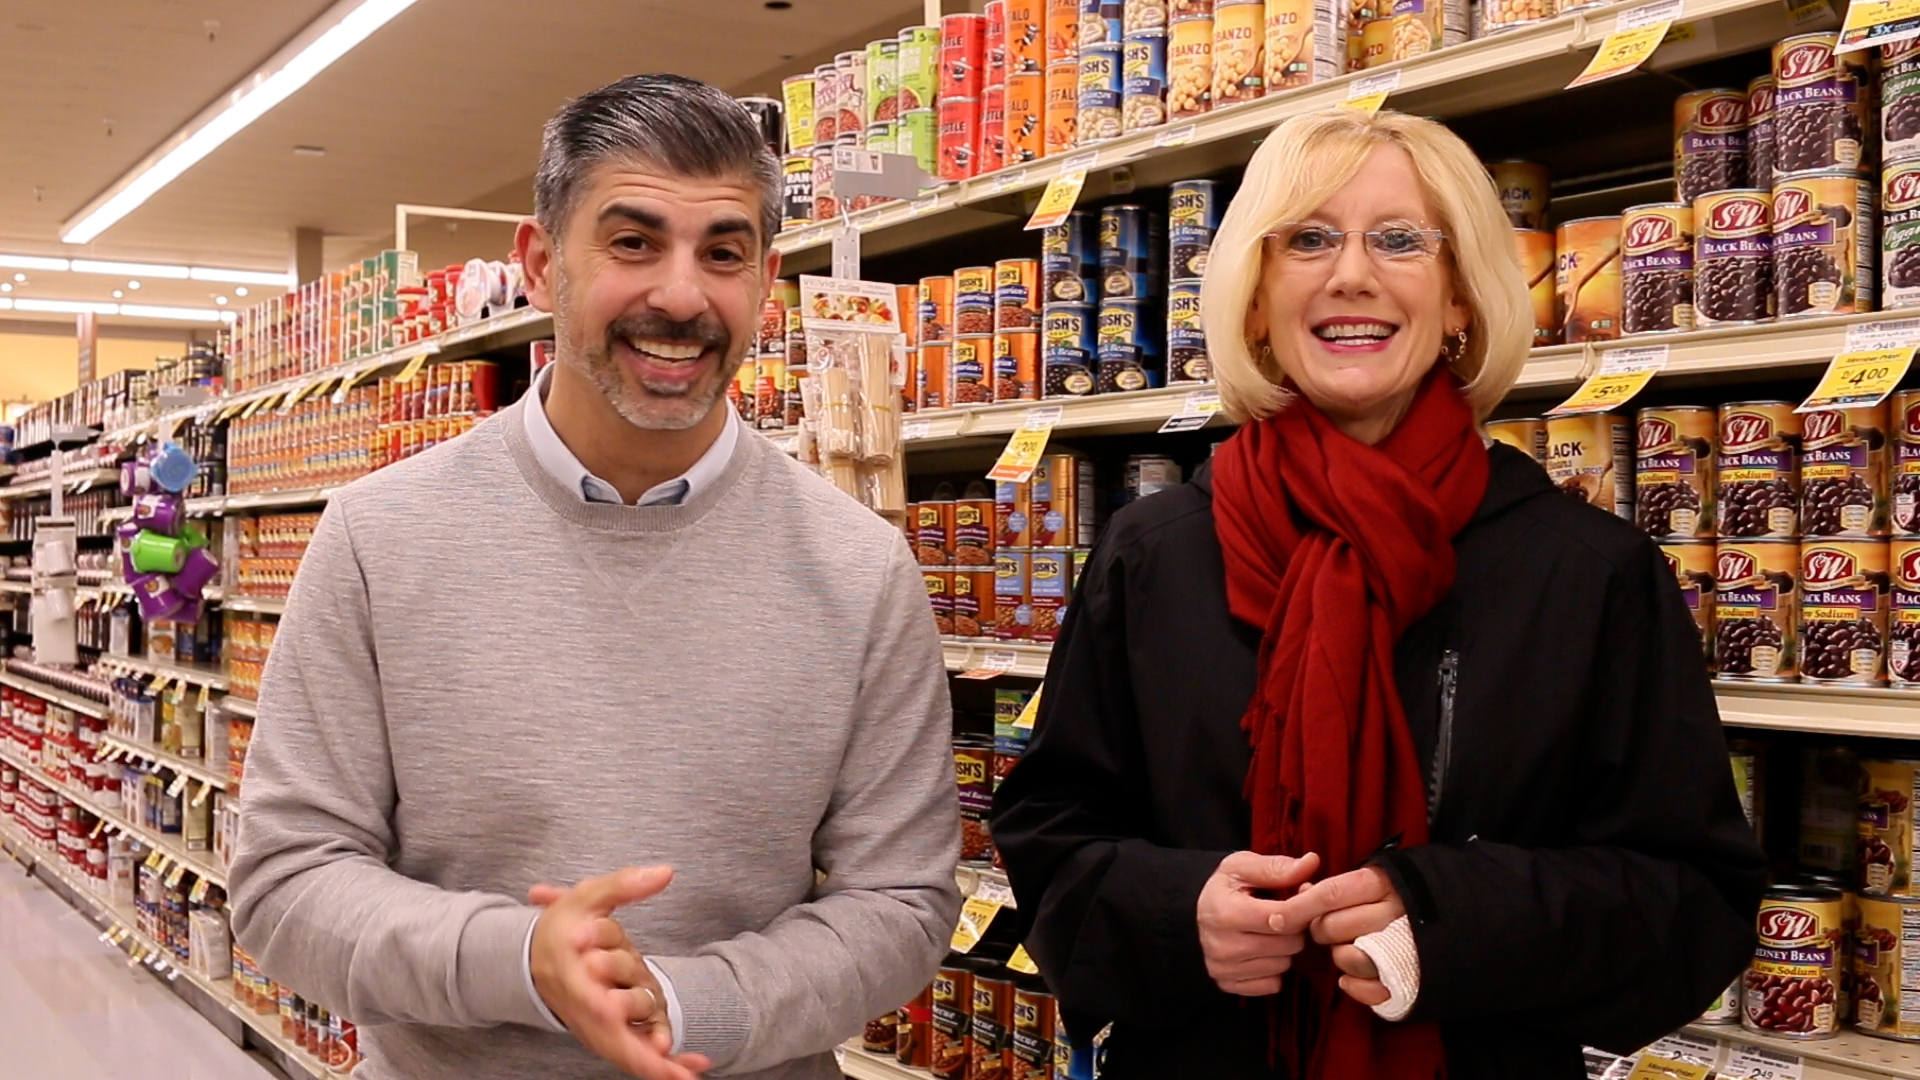 Camas Superintendent John Anzalone and Washougal Superintendent Mary Templeton smile, standing side-by-side in front of the canned food aisle at Safeway grocery store.